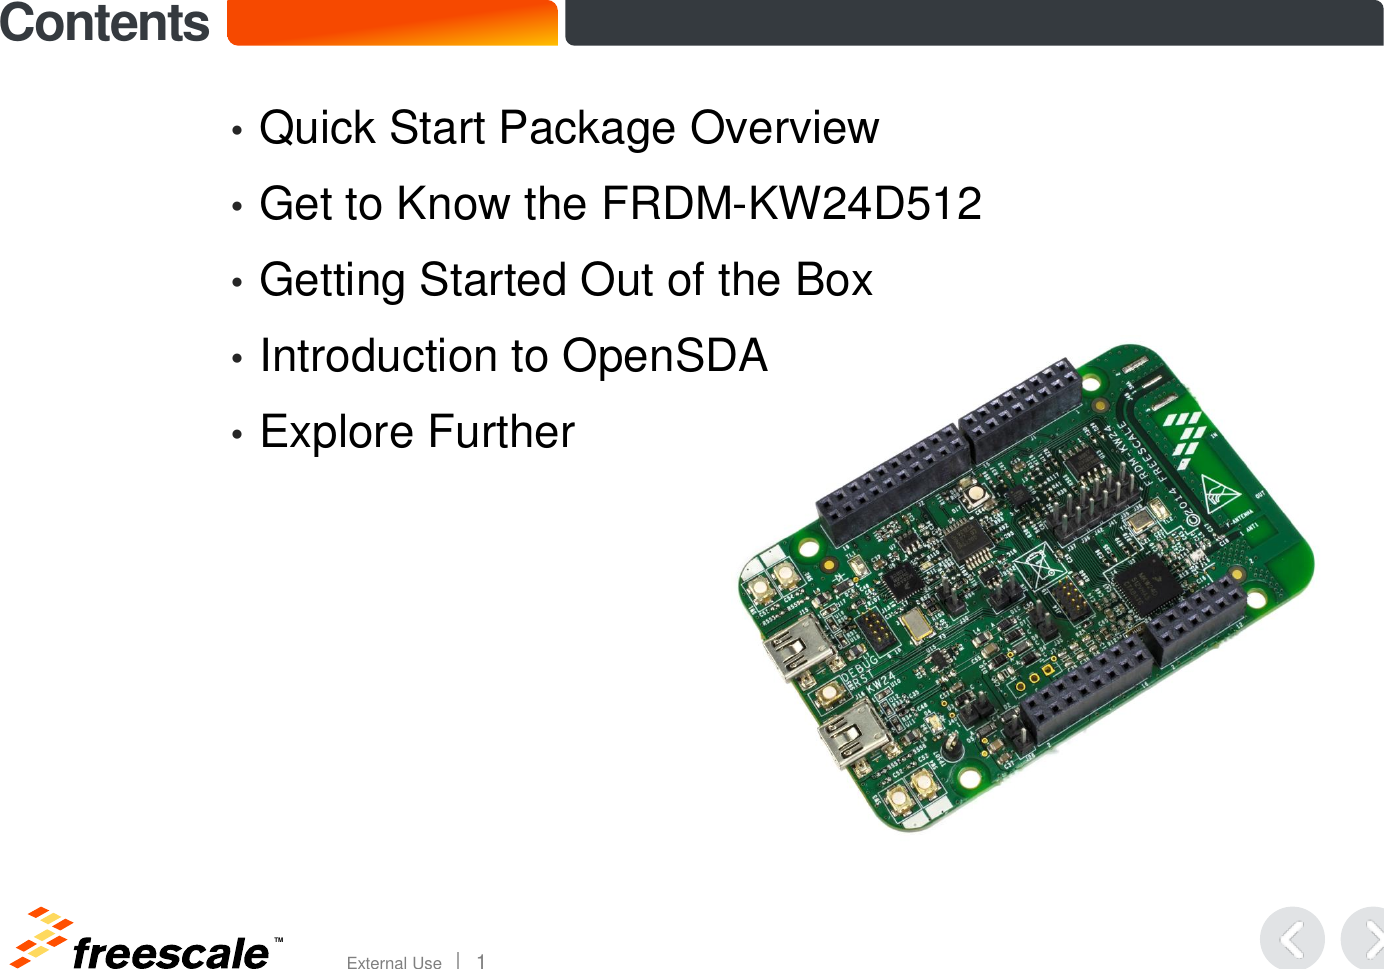 TM External Use       1 Contents •Quick Start Package Overview  •Get to Know the FRDM-KW24D512 •Getting Started Out of the Box  •Introduction to OpenSDA  •Explore Further   